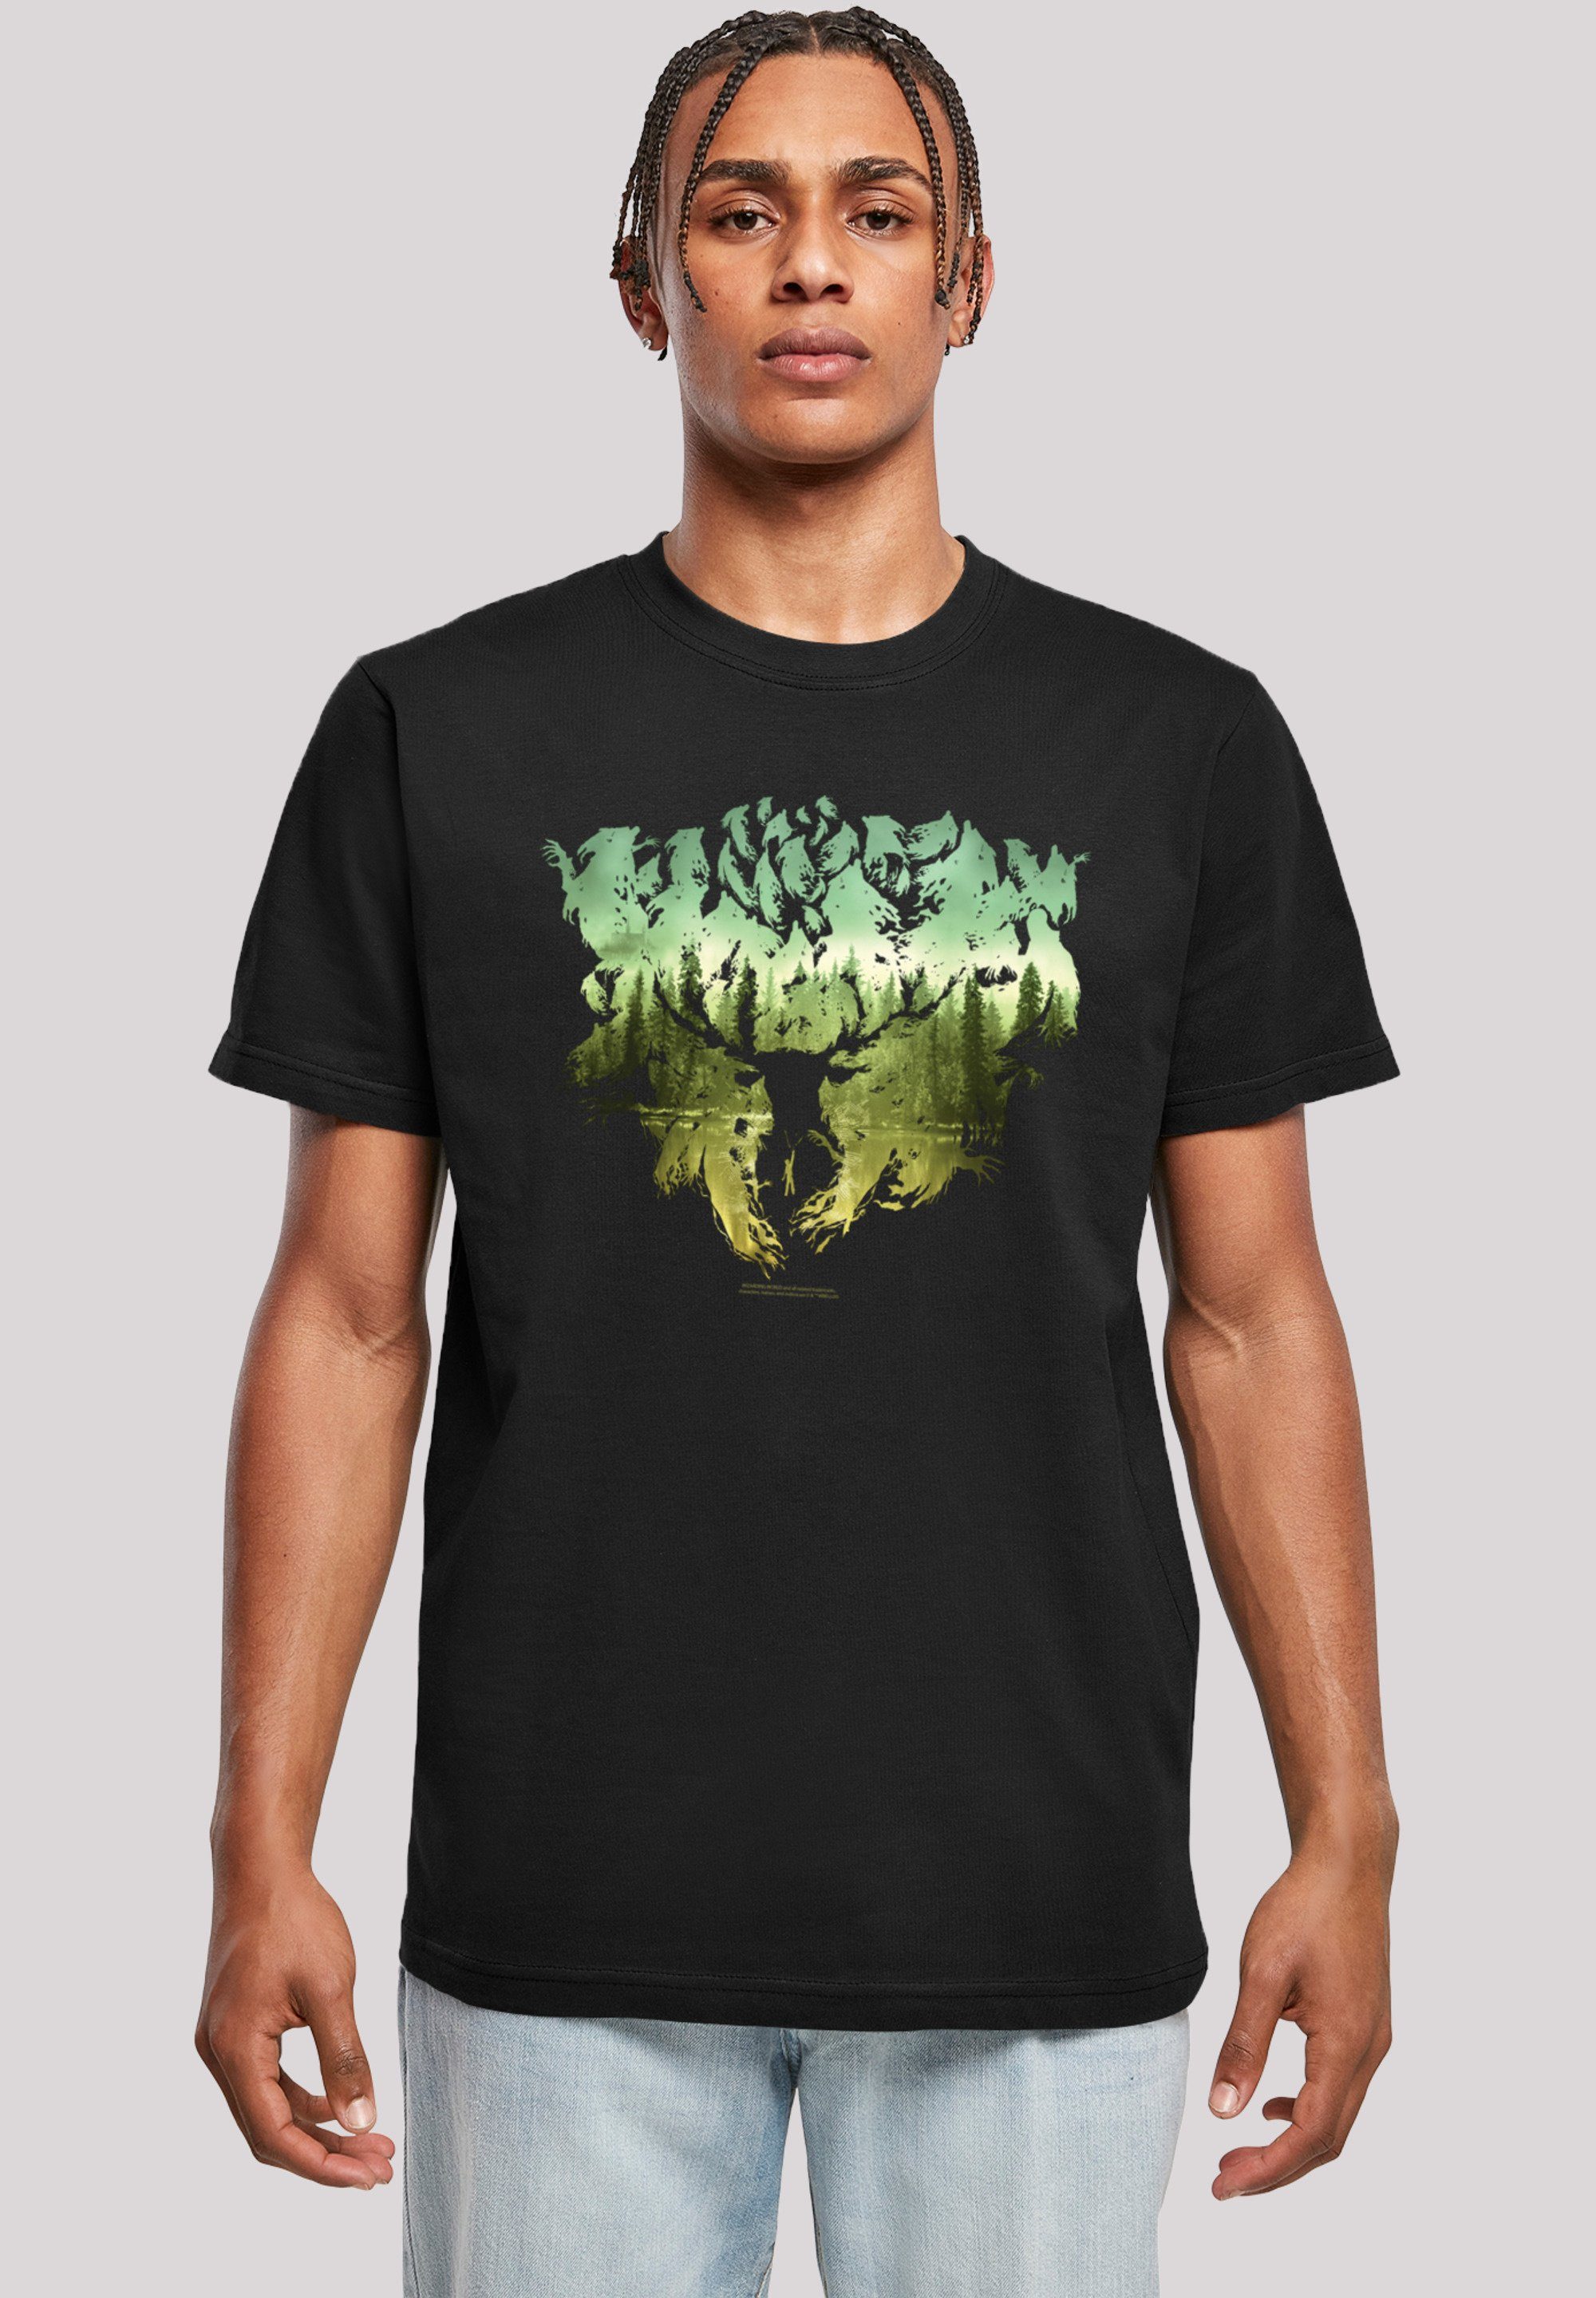 Forest Print Magical T-Shirt F4NT4STIC Harry Potter